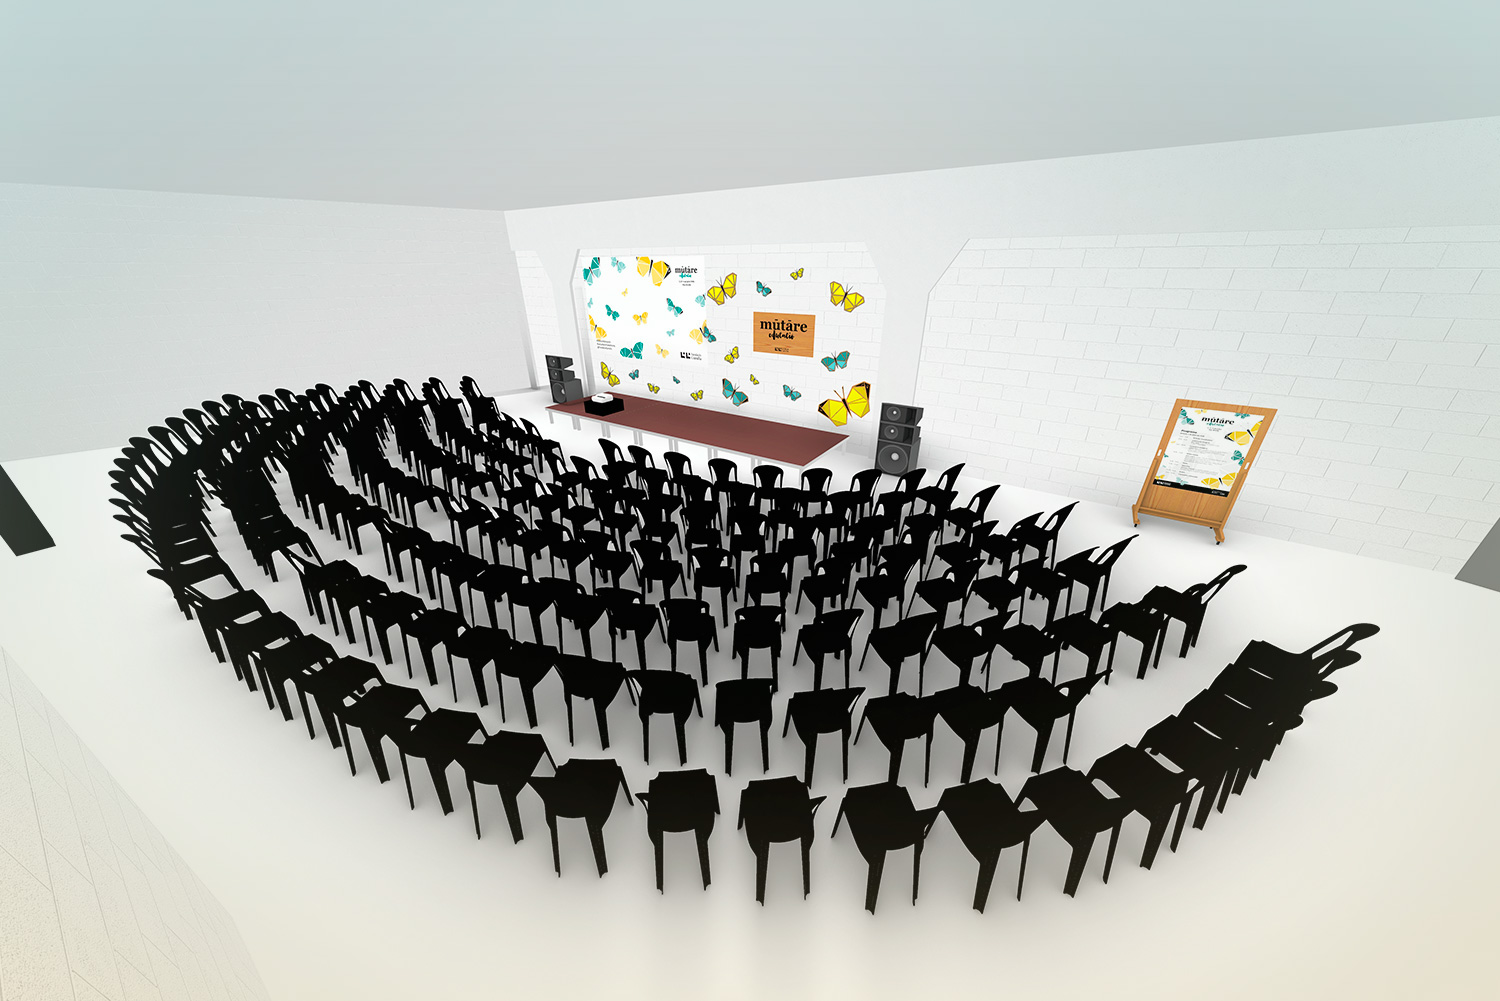 Design for conference area